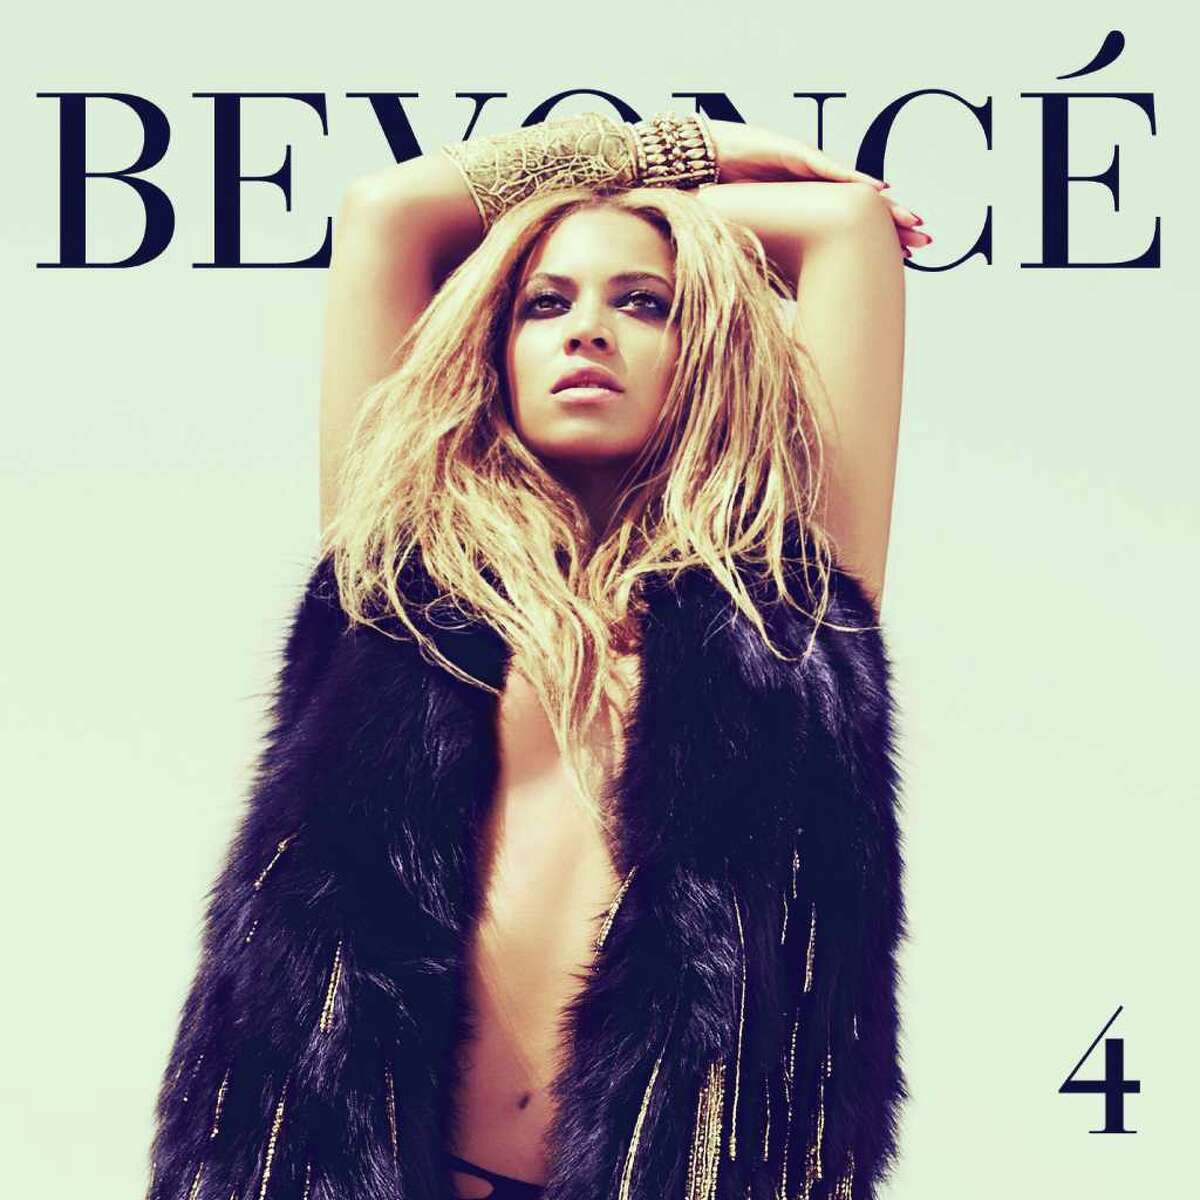 In this CD cover image released by Columbia Records, the latest release by Beyonce, "4," is shown. (AP Photo/Columbia Records)